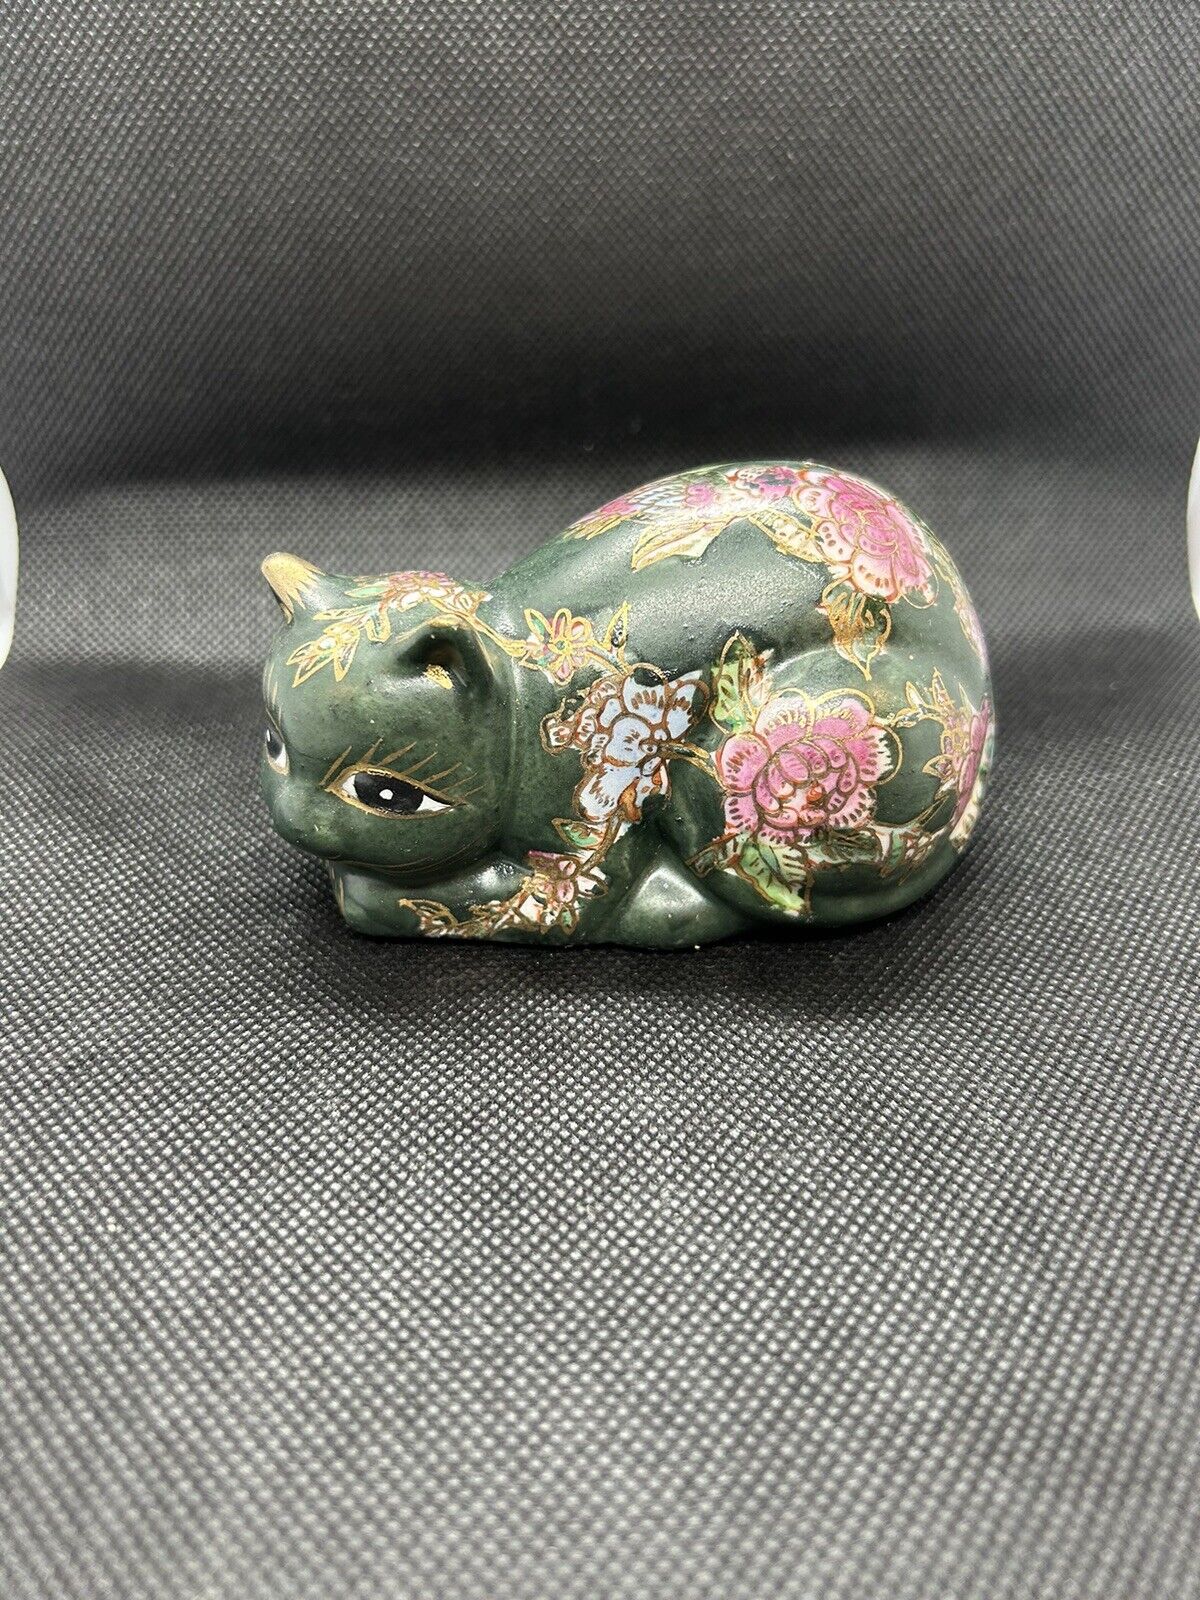 Vintage Porcelain Kitty Cat Figurine Cloisonne Painted Floral and Birds F & F